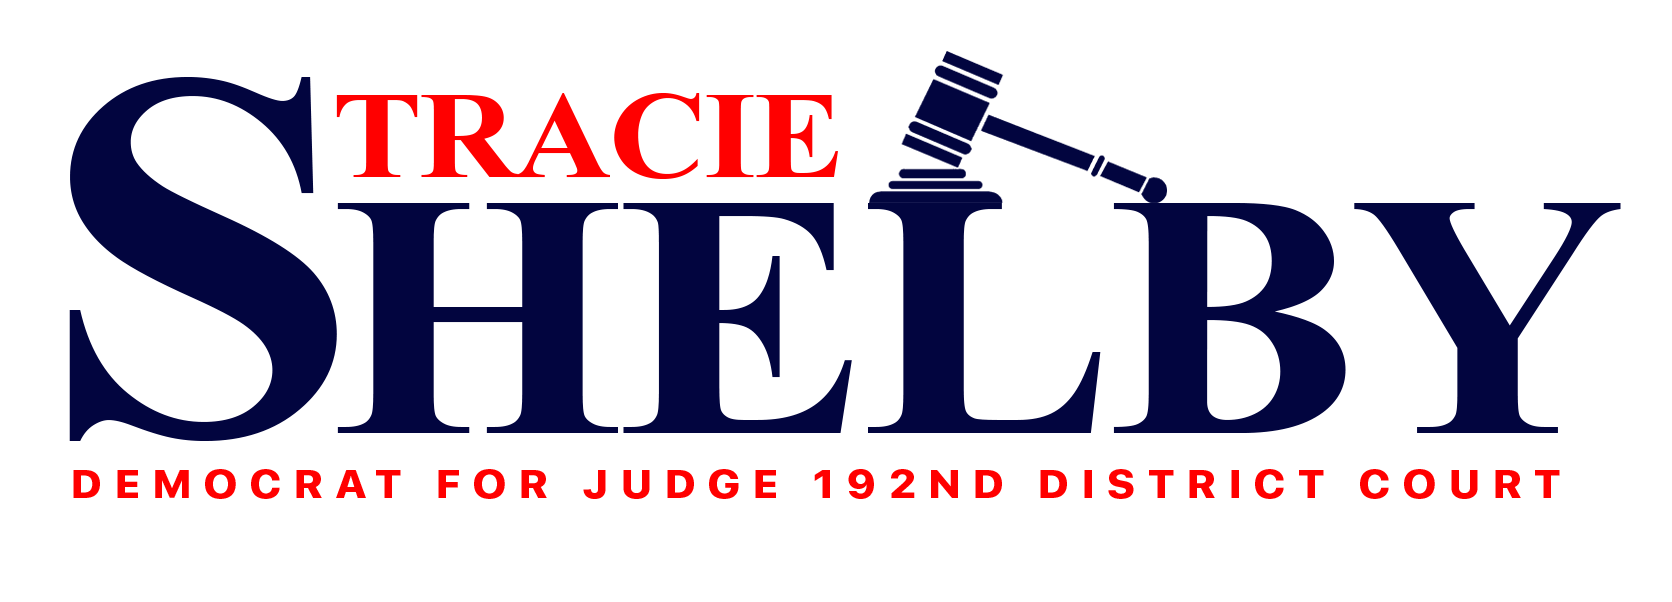 Tracie Shelby for Judge logo